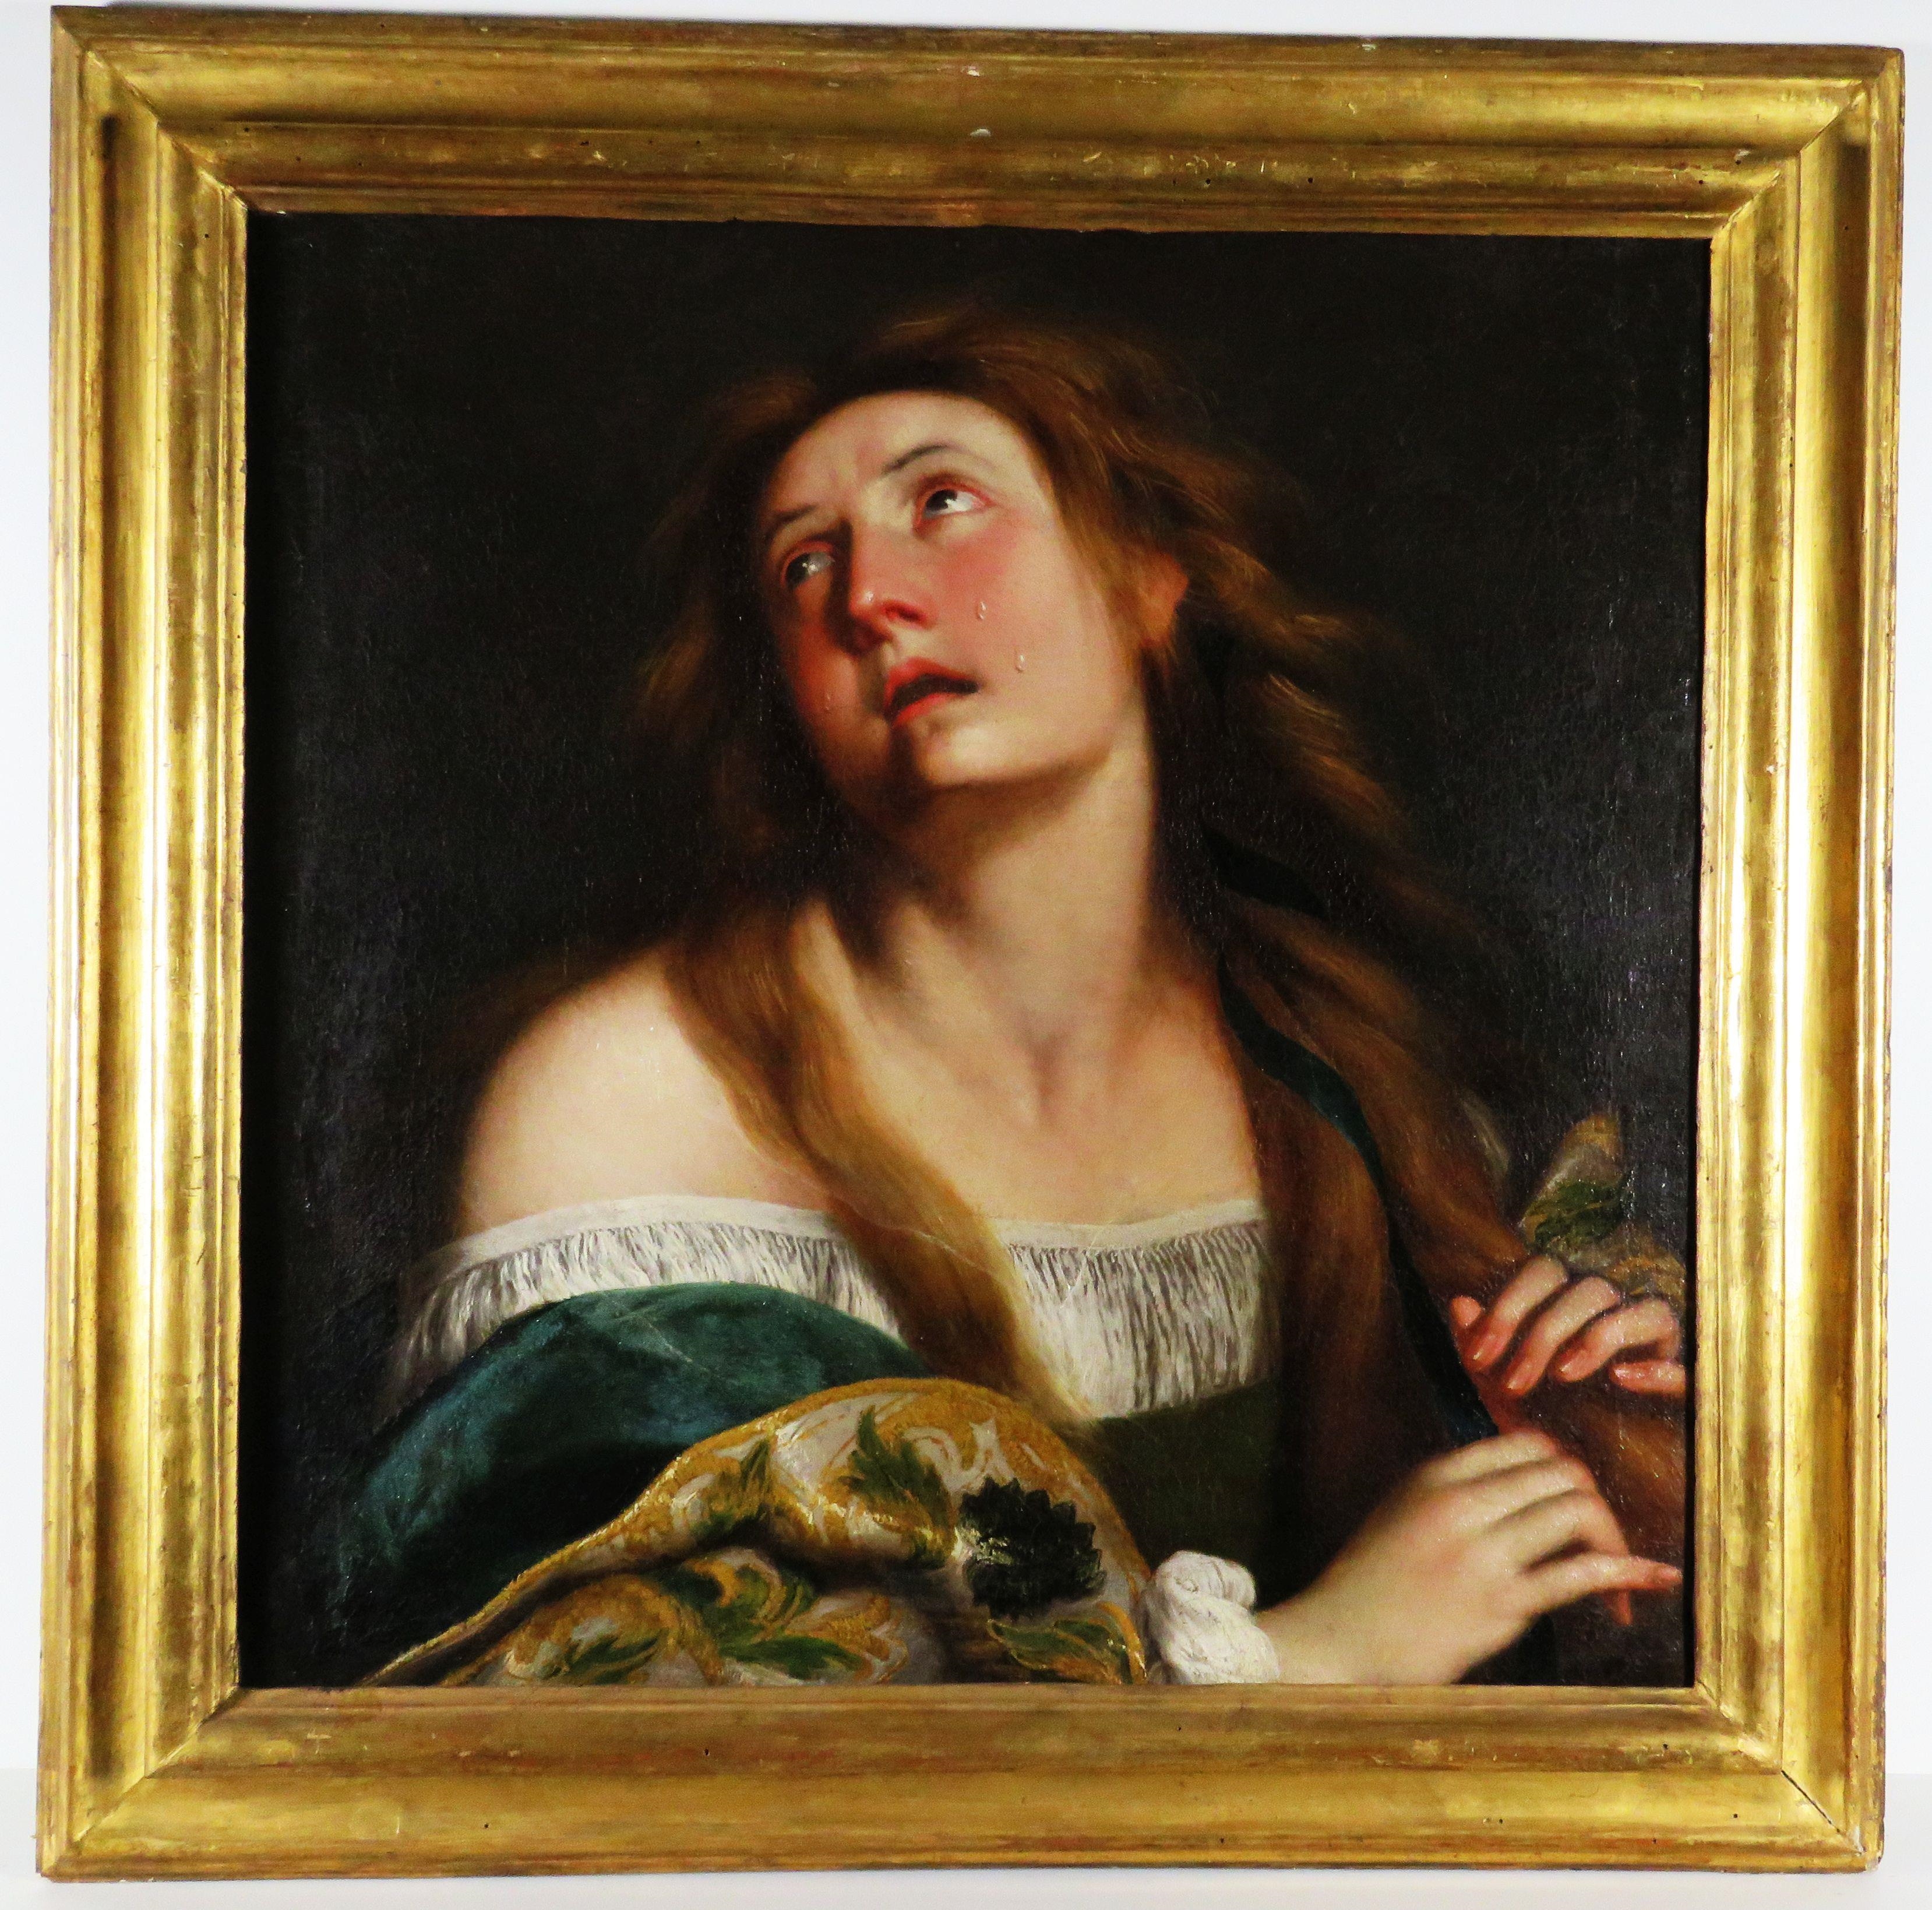 Artwork by Cesare Fracanzano, Die reuevolle Hl. Magdalena, Made of oil on canvas,